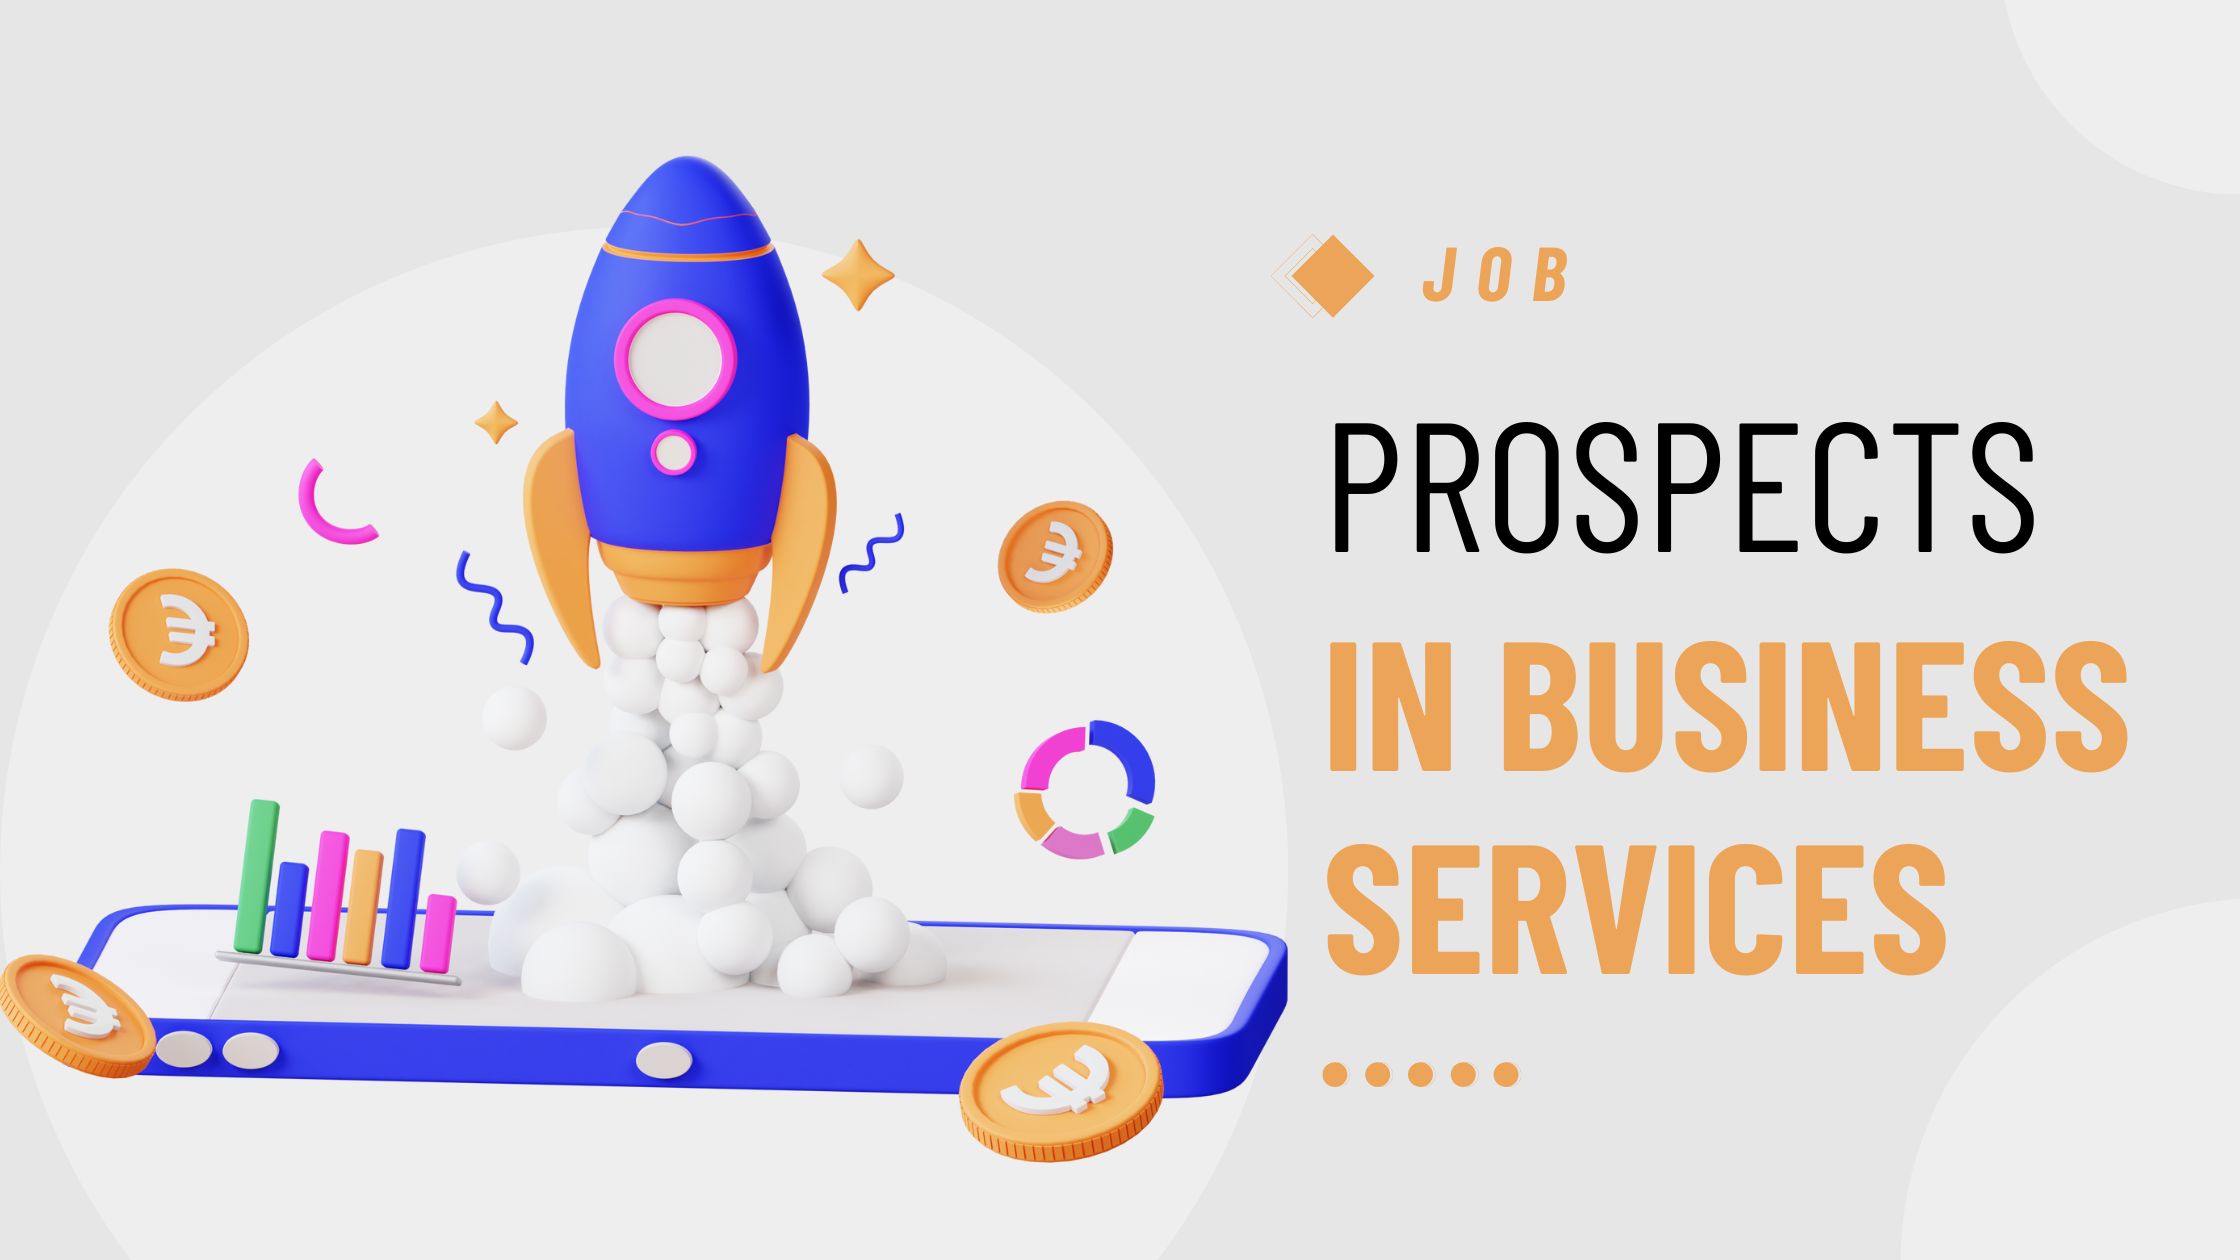 Job Prospects in Business Services